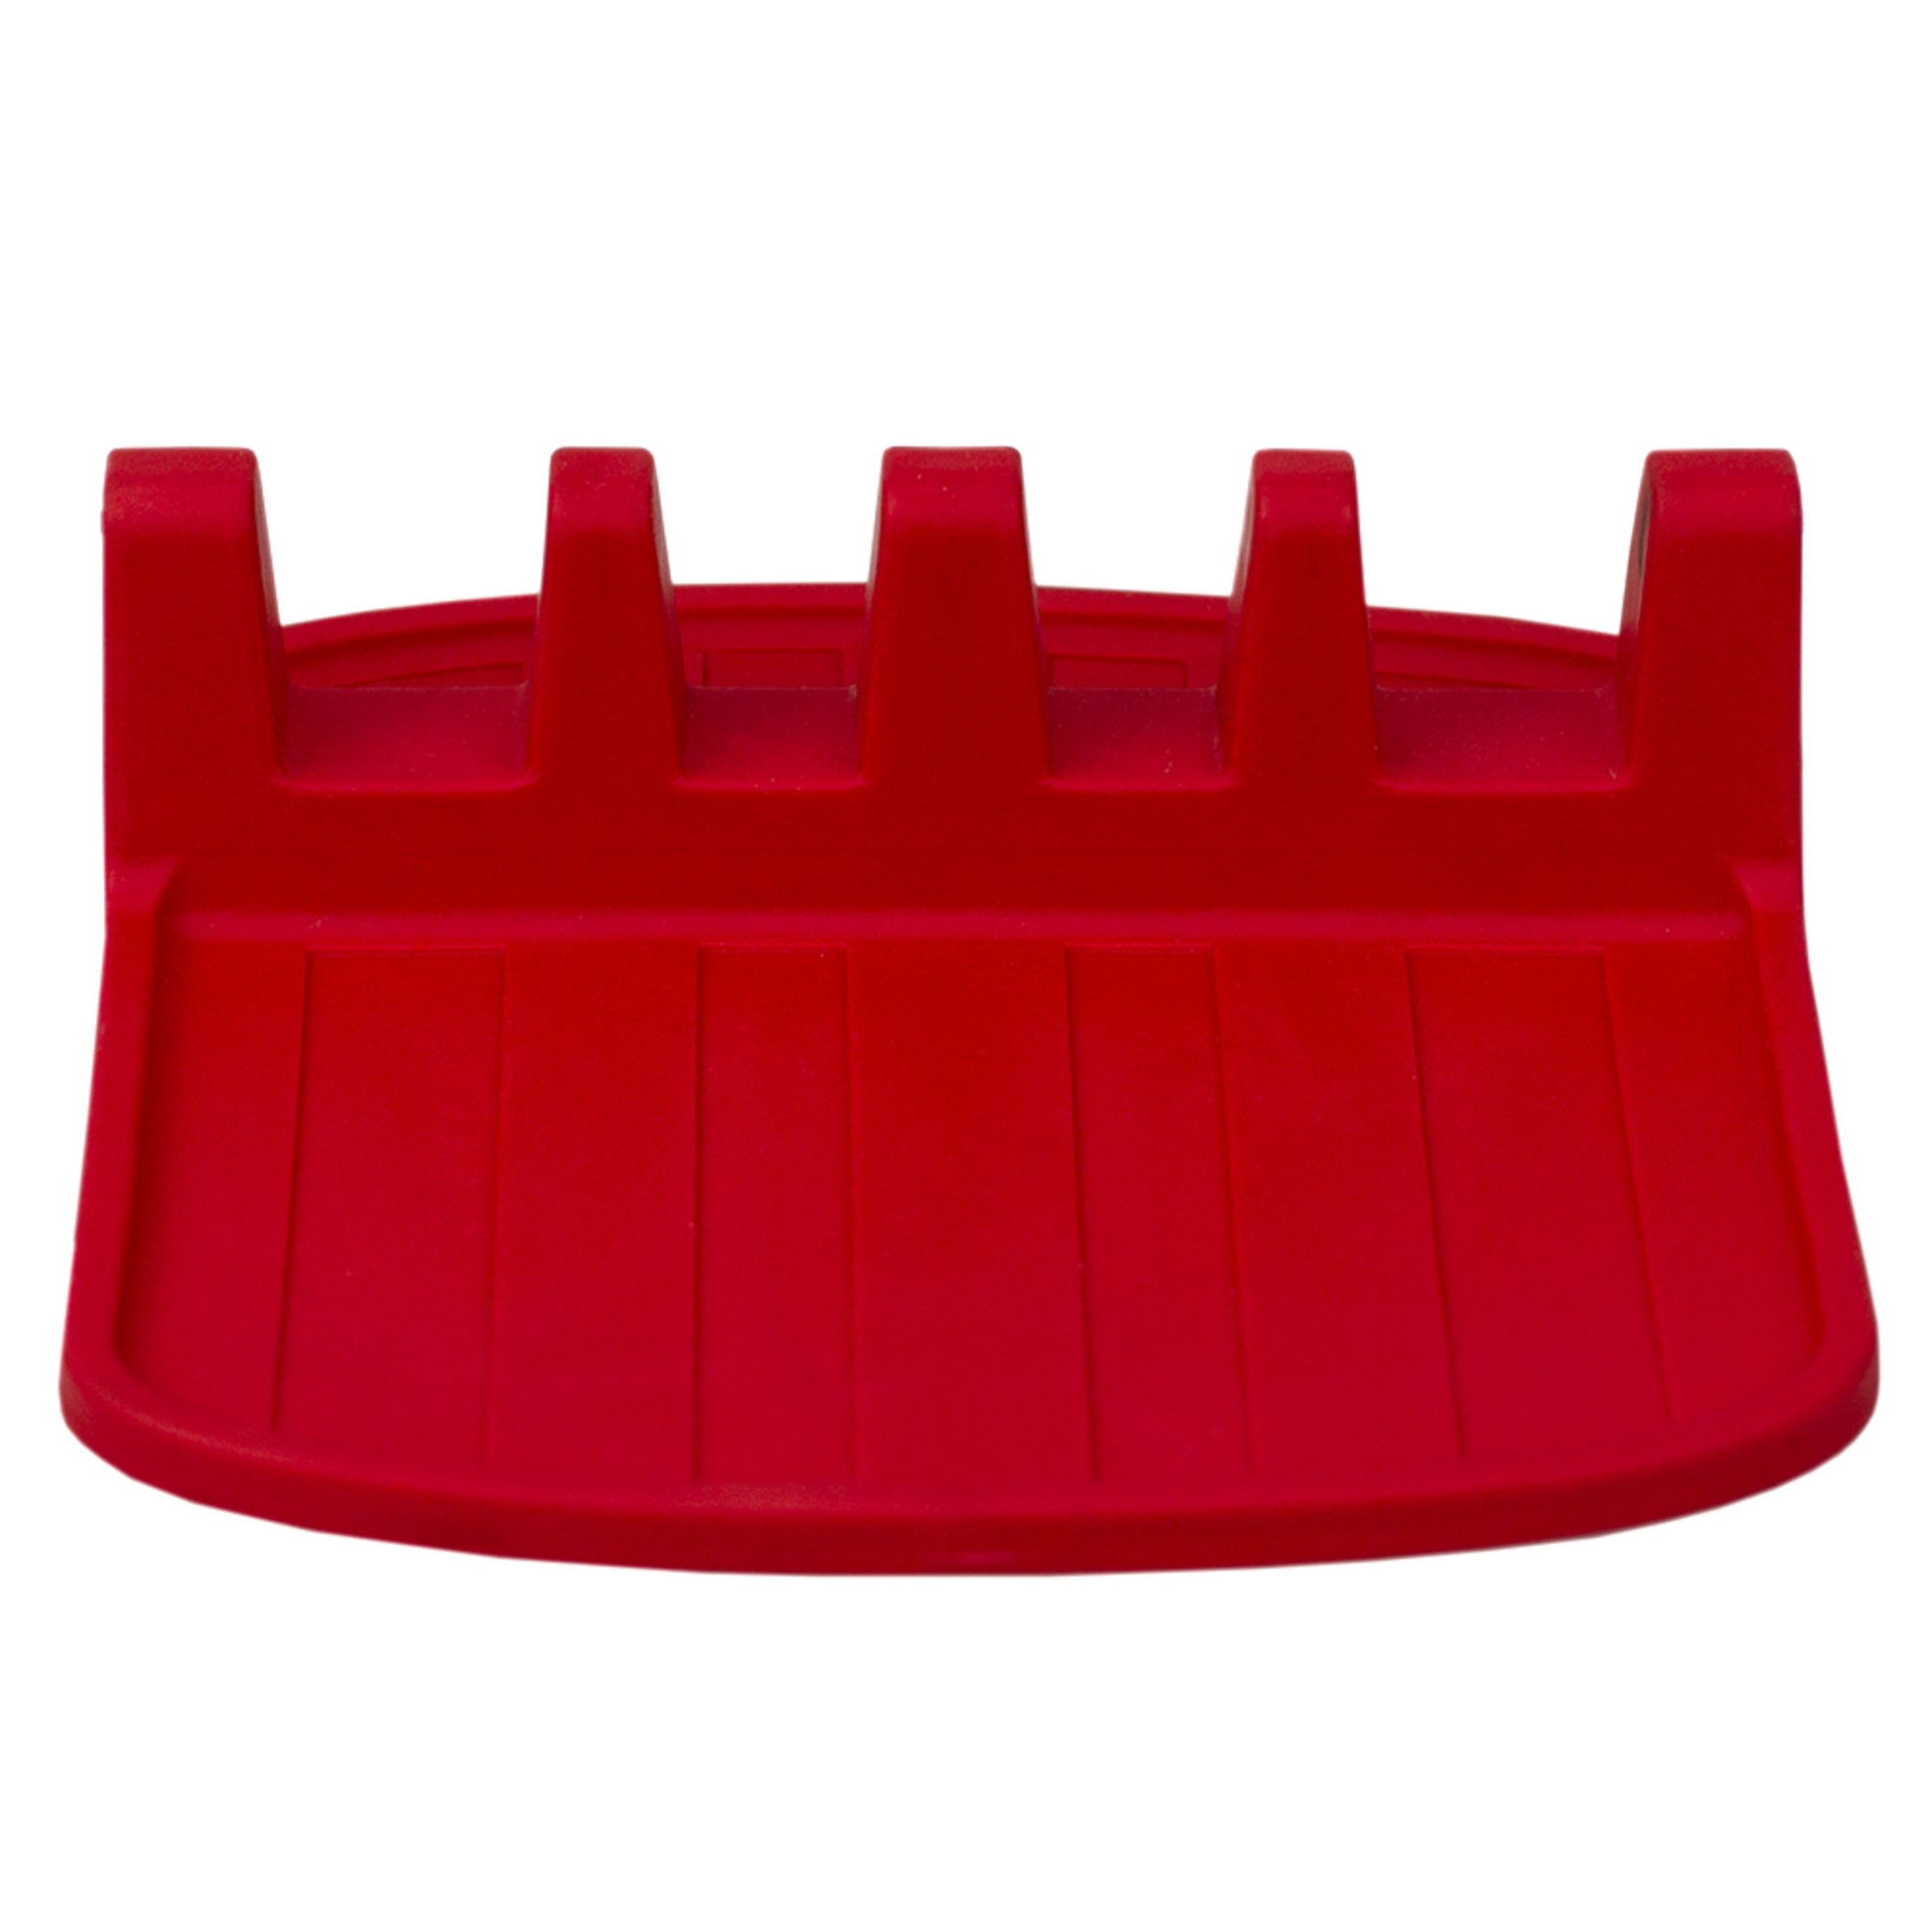 Home Basics 4 Slot Silicone Spoon Rest, Red - Red